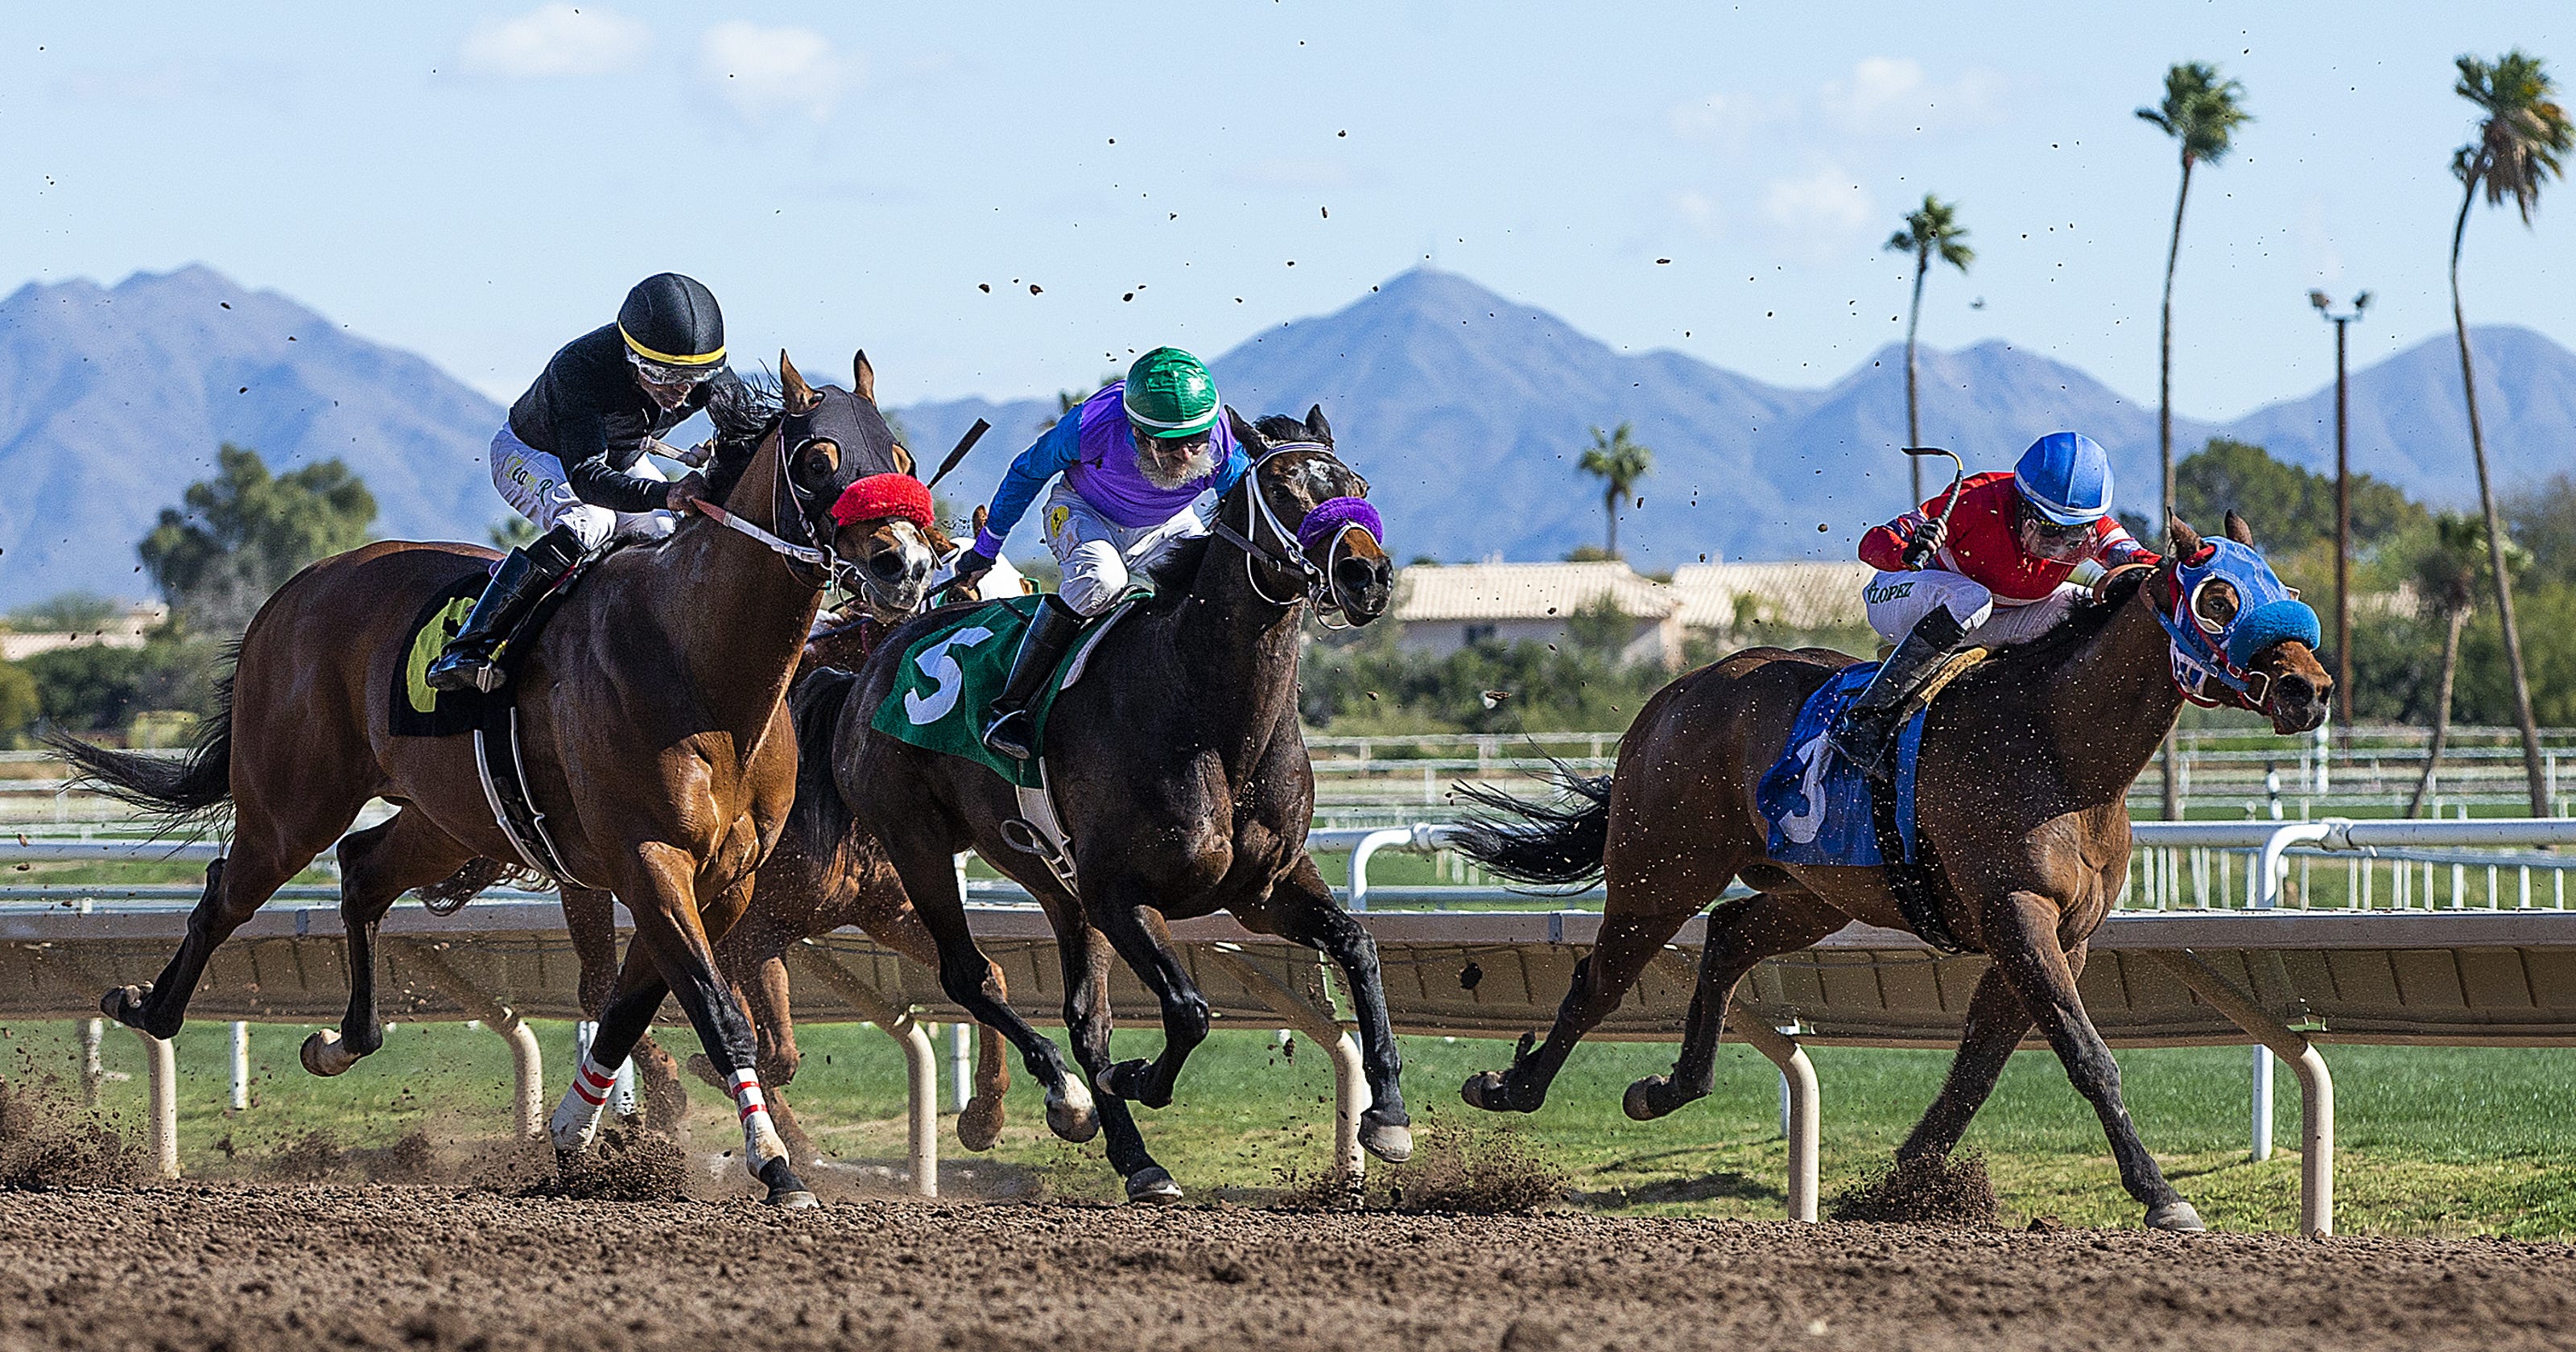 Arizona racehorses are dying at a staggering rate